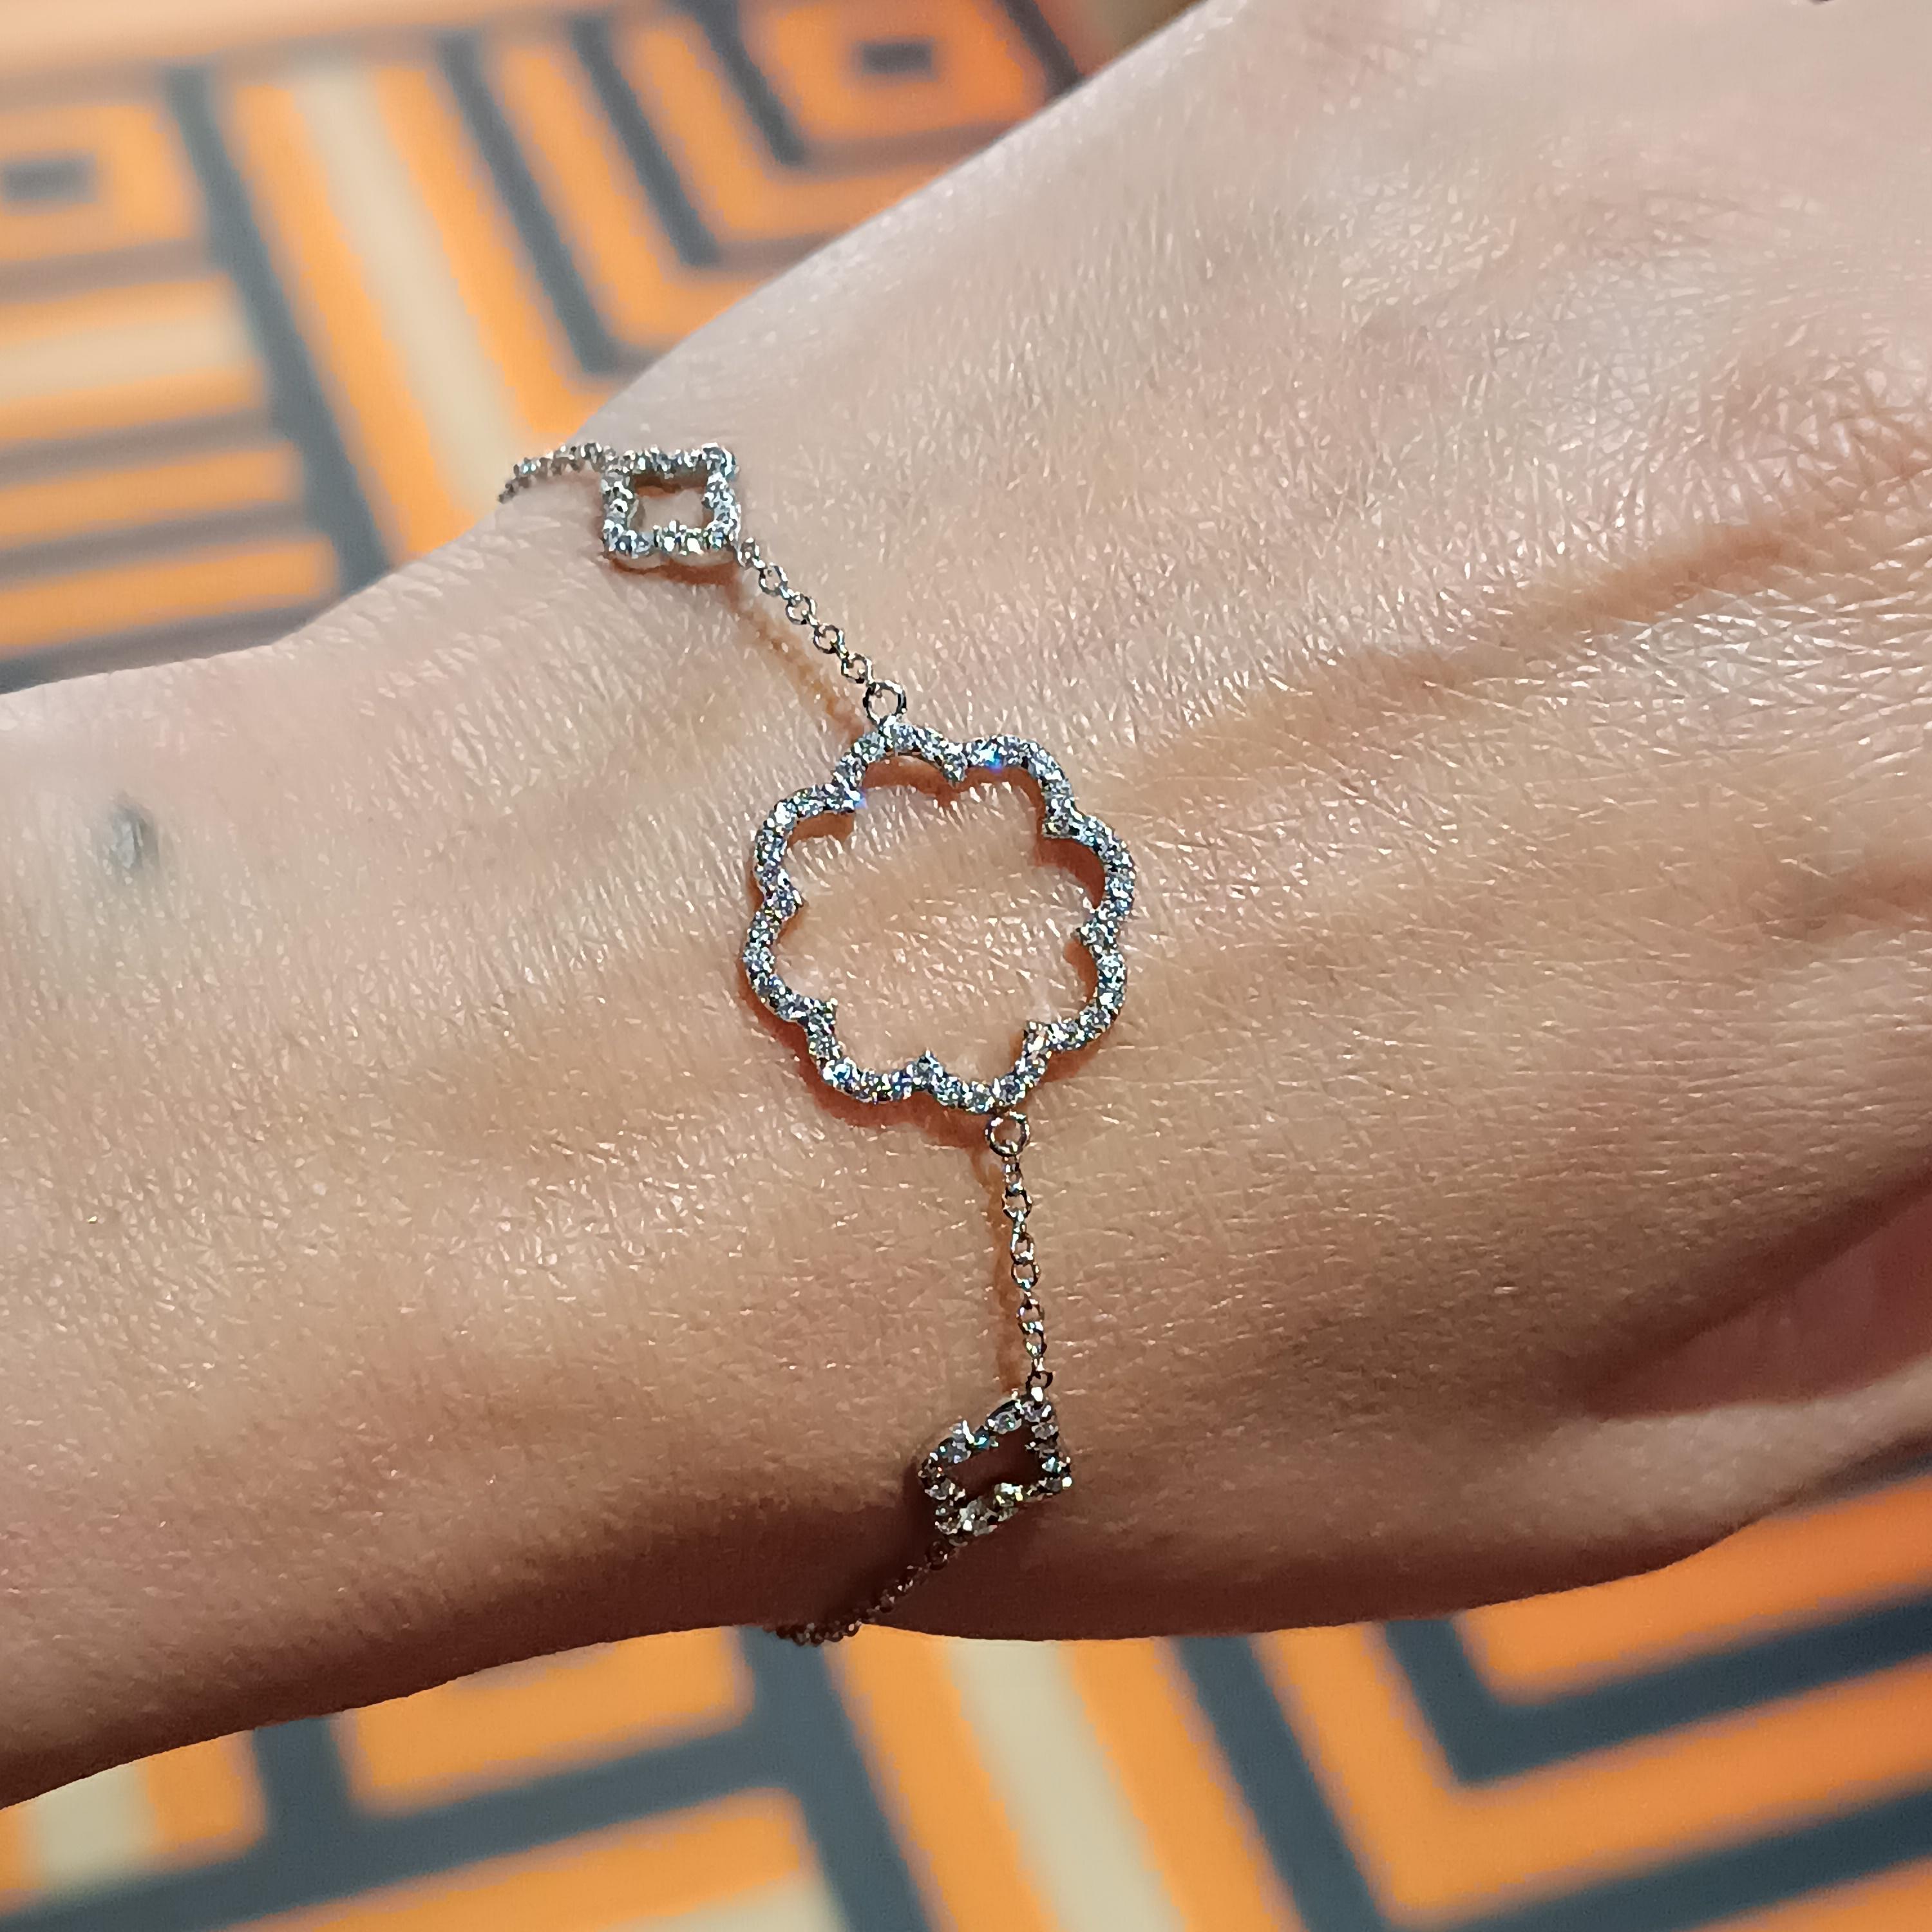 Magnificent and bright VS G color diamond  Carat 0.75  Bracelet in 18 carat white gold Grams 4.06 total diamonds stones 75
Simplicity at it's best, one of our most sold item. the size of the bracelet starts to 17.5 cm and is adjustable up to 18.5